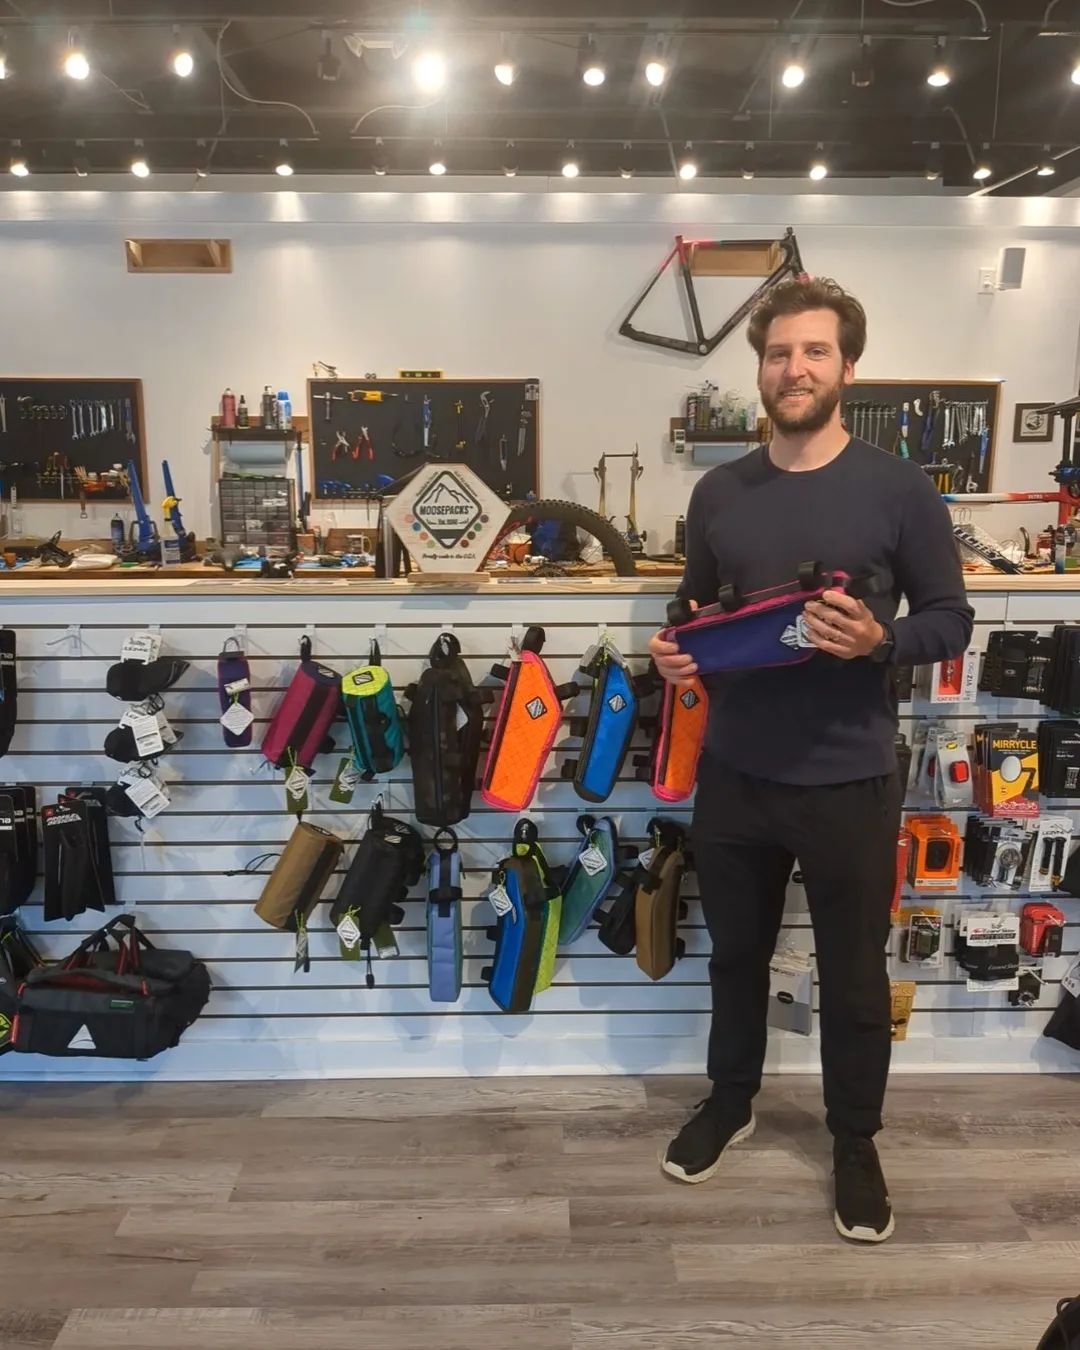 We had the pleasure of a visit from Matt Moosa, founder and maker of MoosePacks. We enjoyed talking with Matt about his mission to offer high quality packs for everyday adventures. Born in Boone, NC and made in the USA, these packs are stylish &amp; 